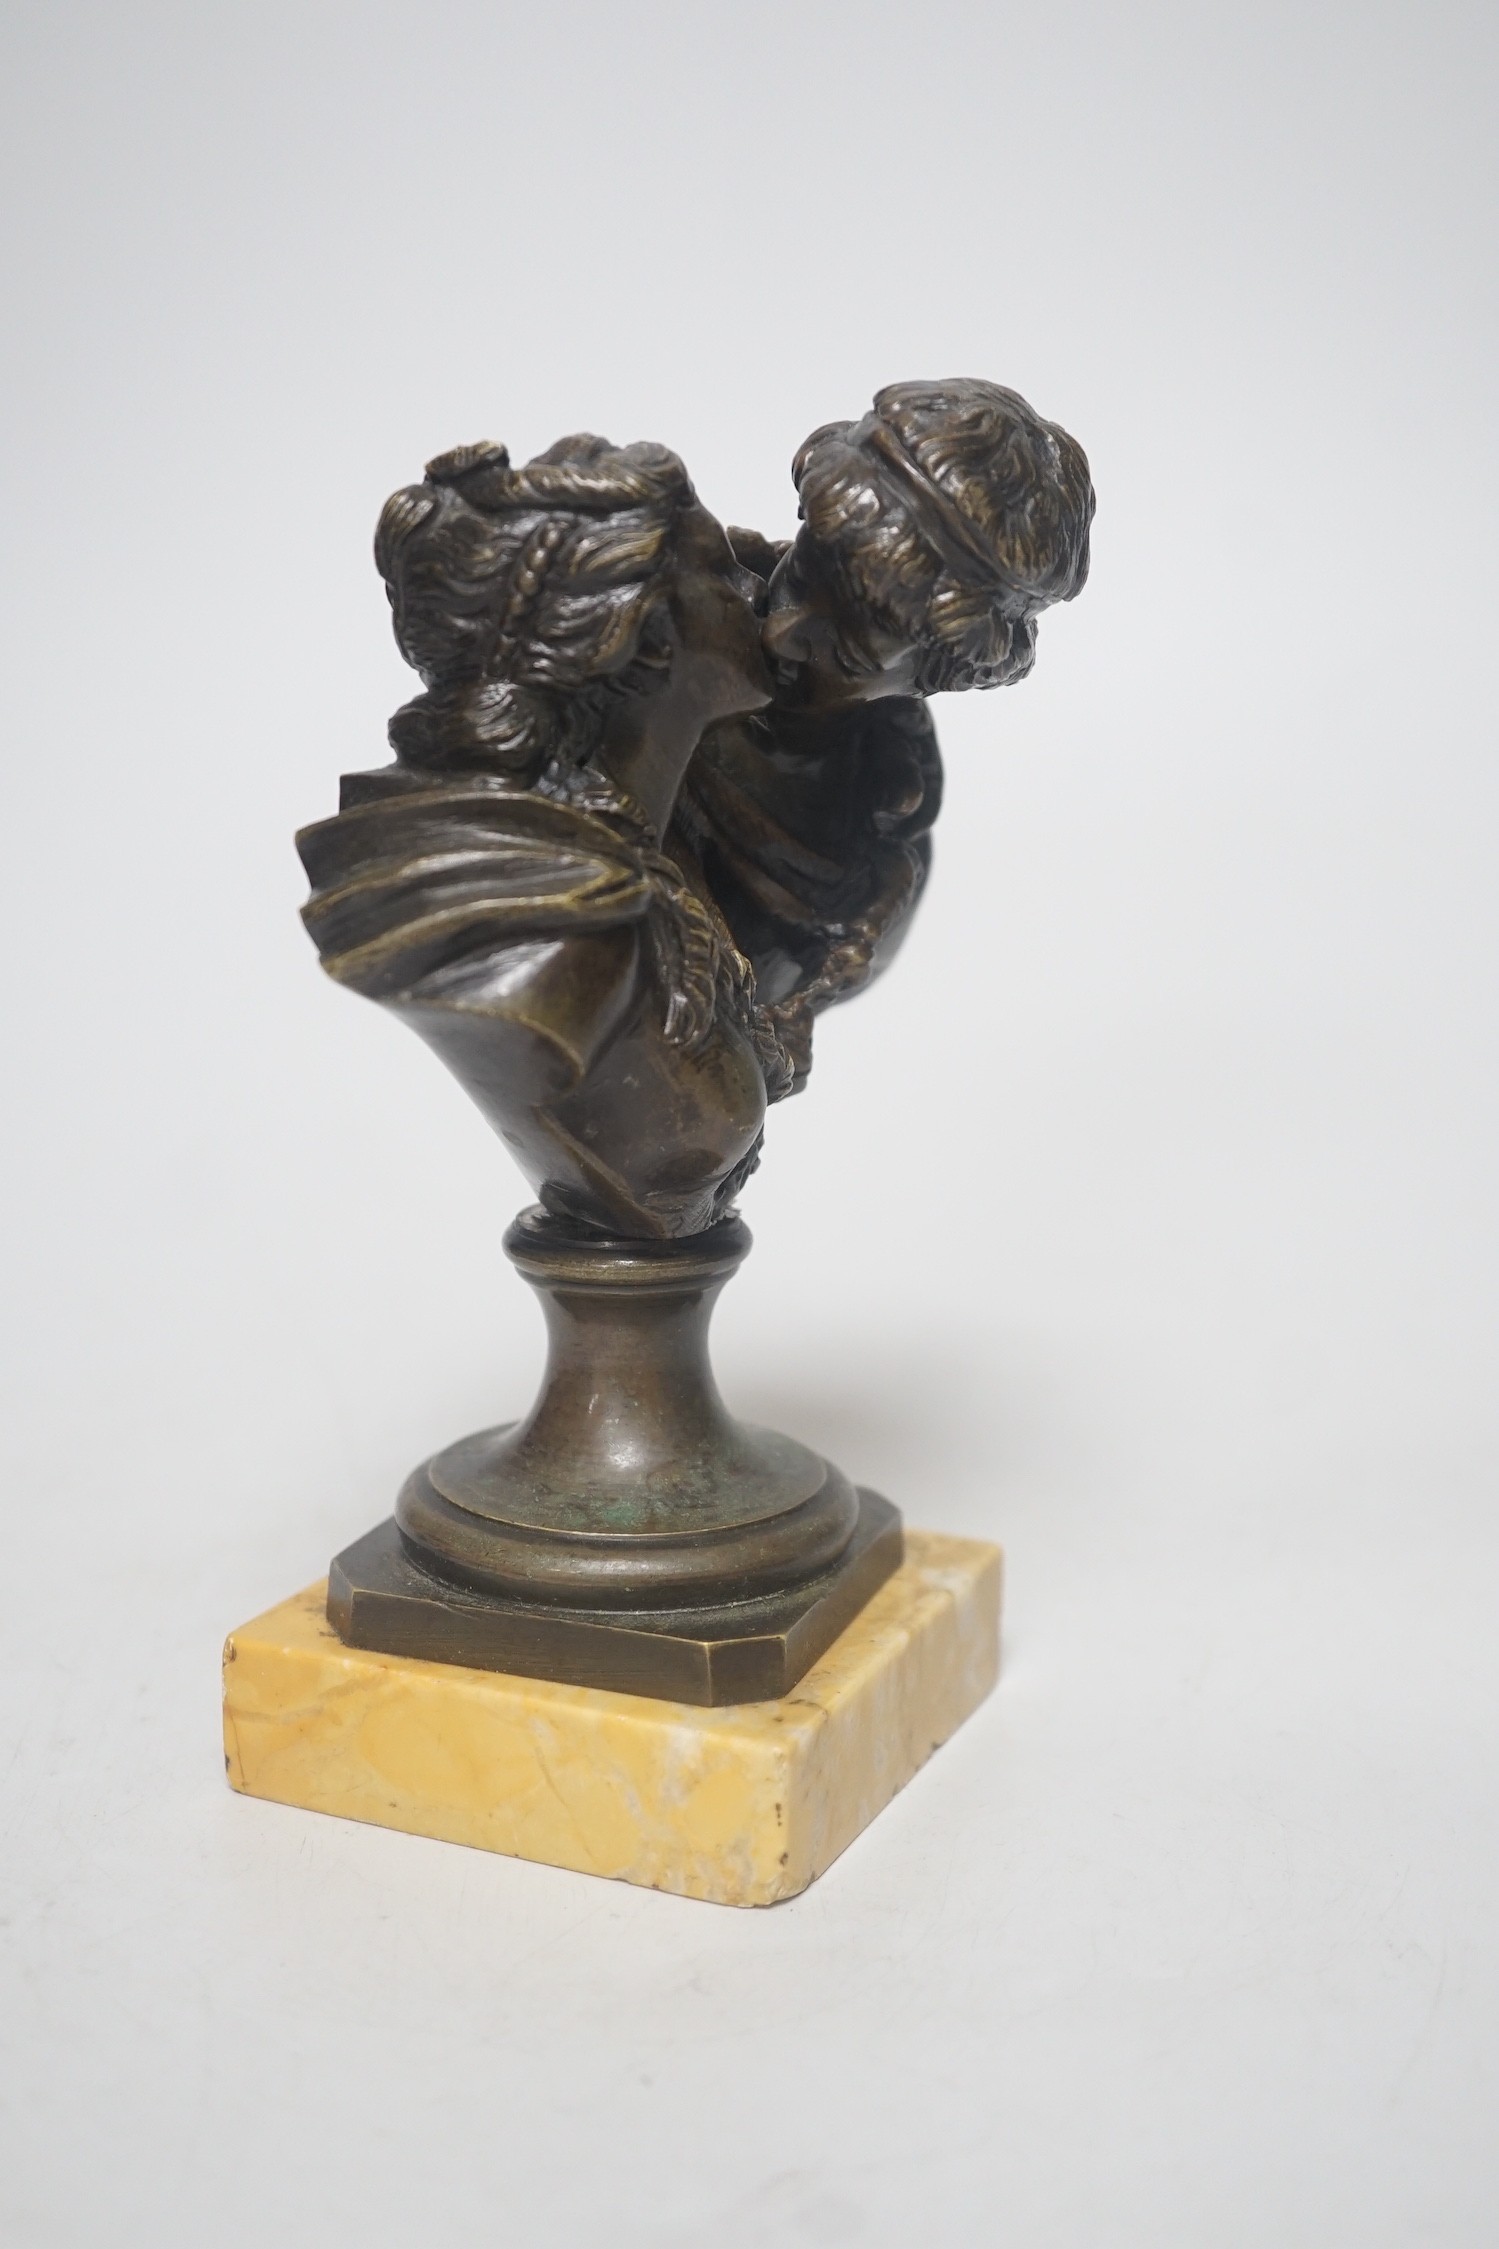 After Jean-Antoine Houdon (1741-1828), 'Le Baiser Donné' (The Kiss Bestowed], a 19th-century patinated bronze figure group, on a square Siena marble base, 16cm tall